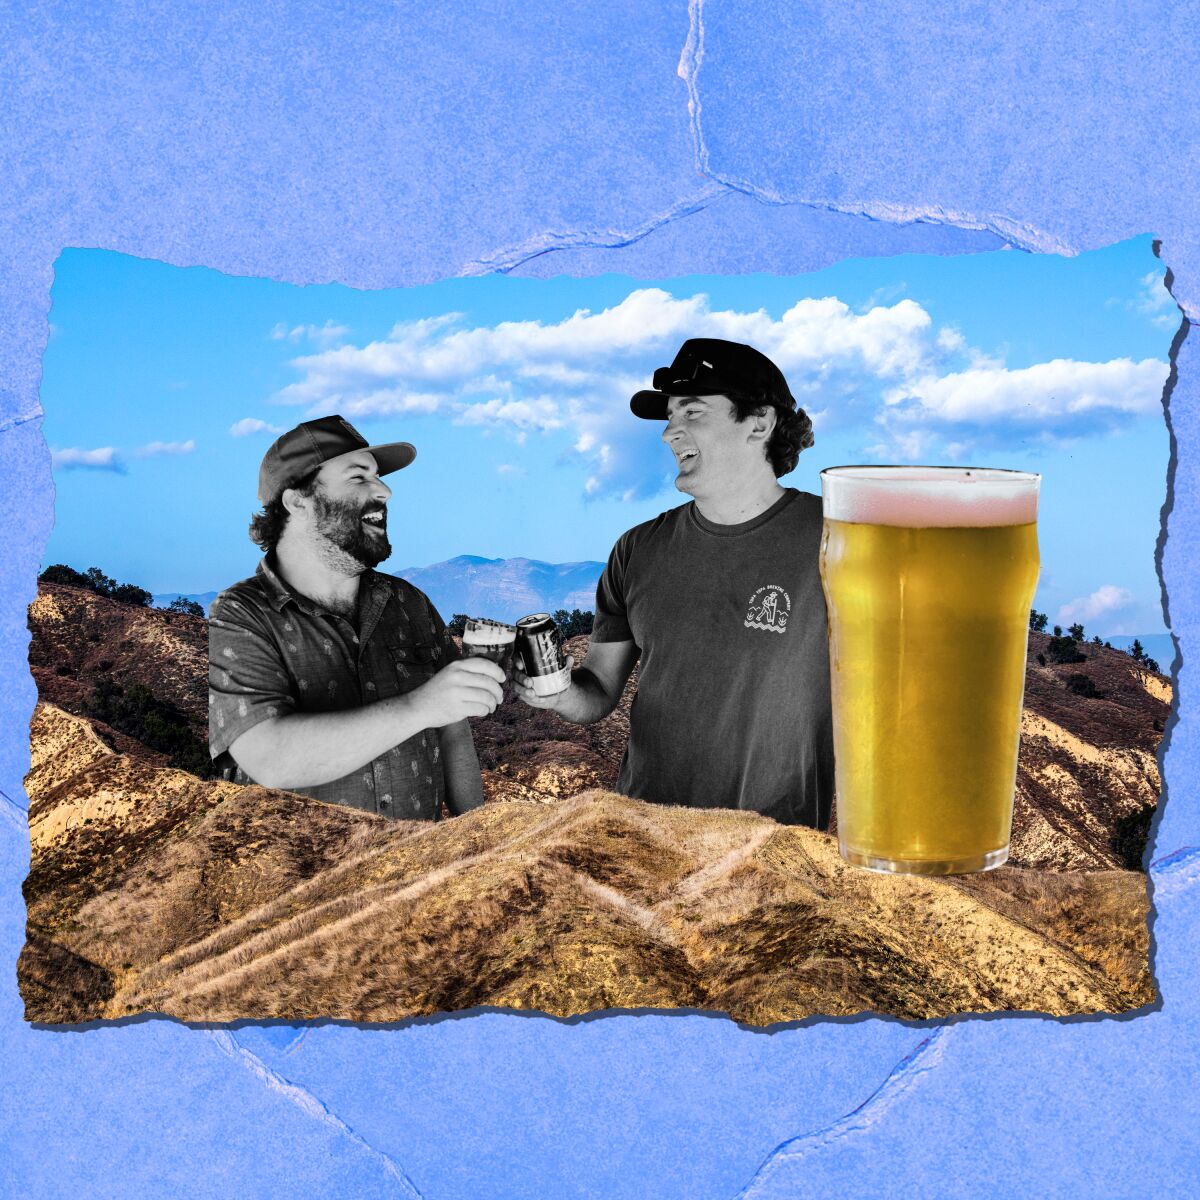 Two men hold beers; they are surrounded by mountains.